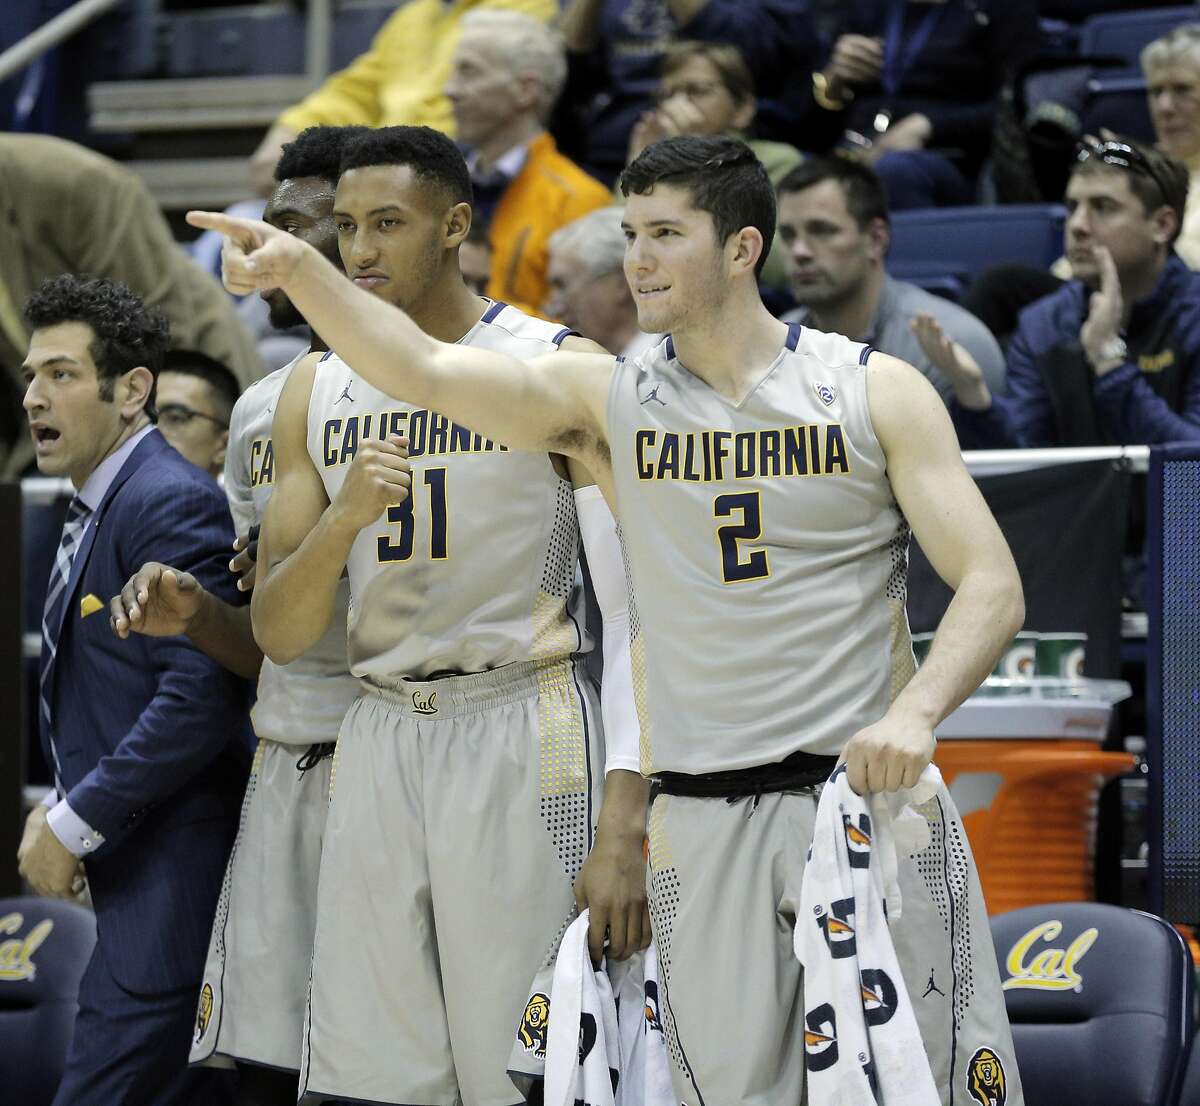 Sam Singer (2) and Stephen Domingo (31) gesture to teammates from the bench in the second half as the Cal Bears played the Seattle University Redhawks at Haas Pavilion in Berkeley, Calif., on Tuesday, December 1, 2015. Cal won 66-52.